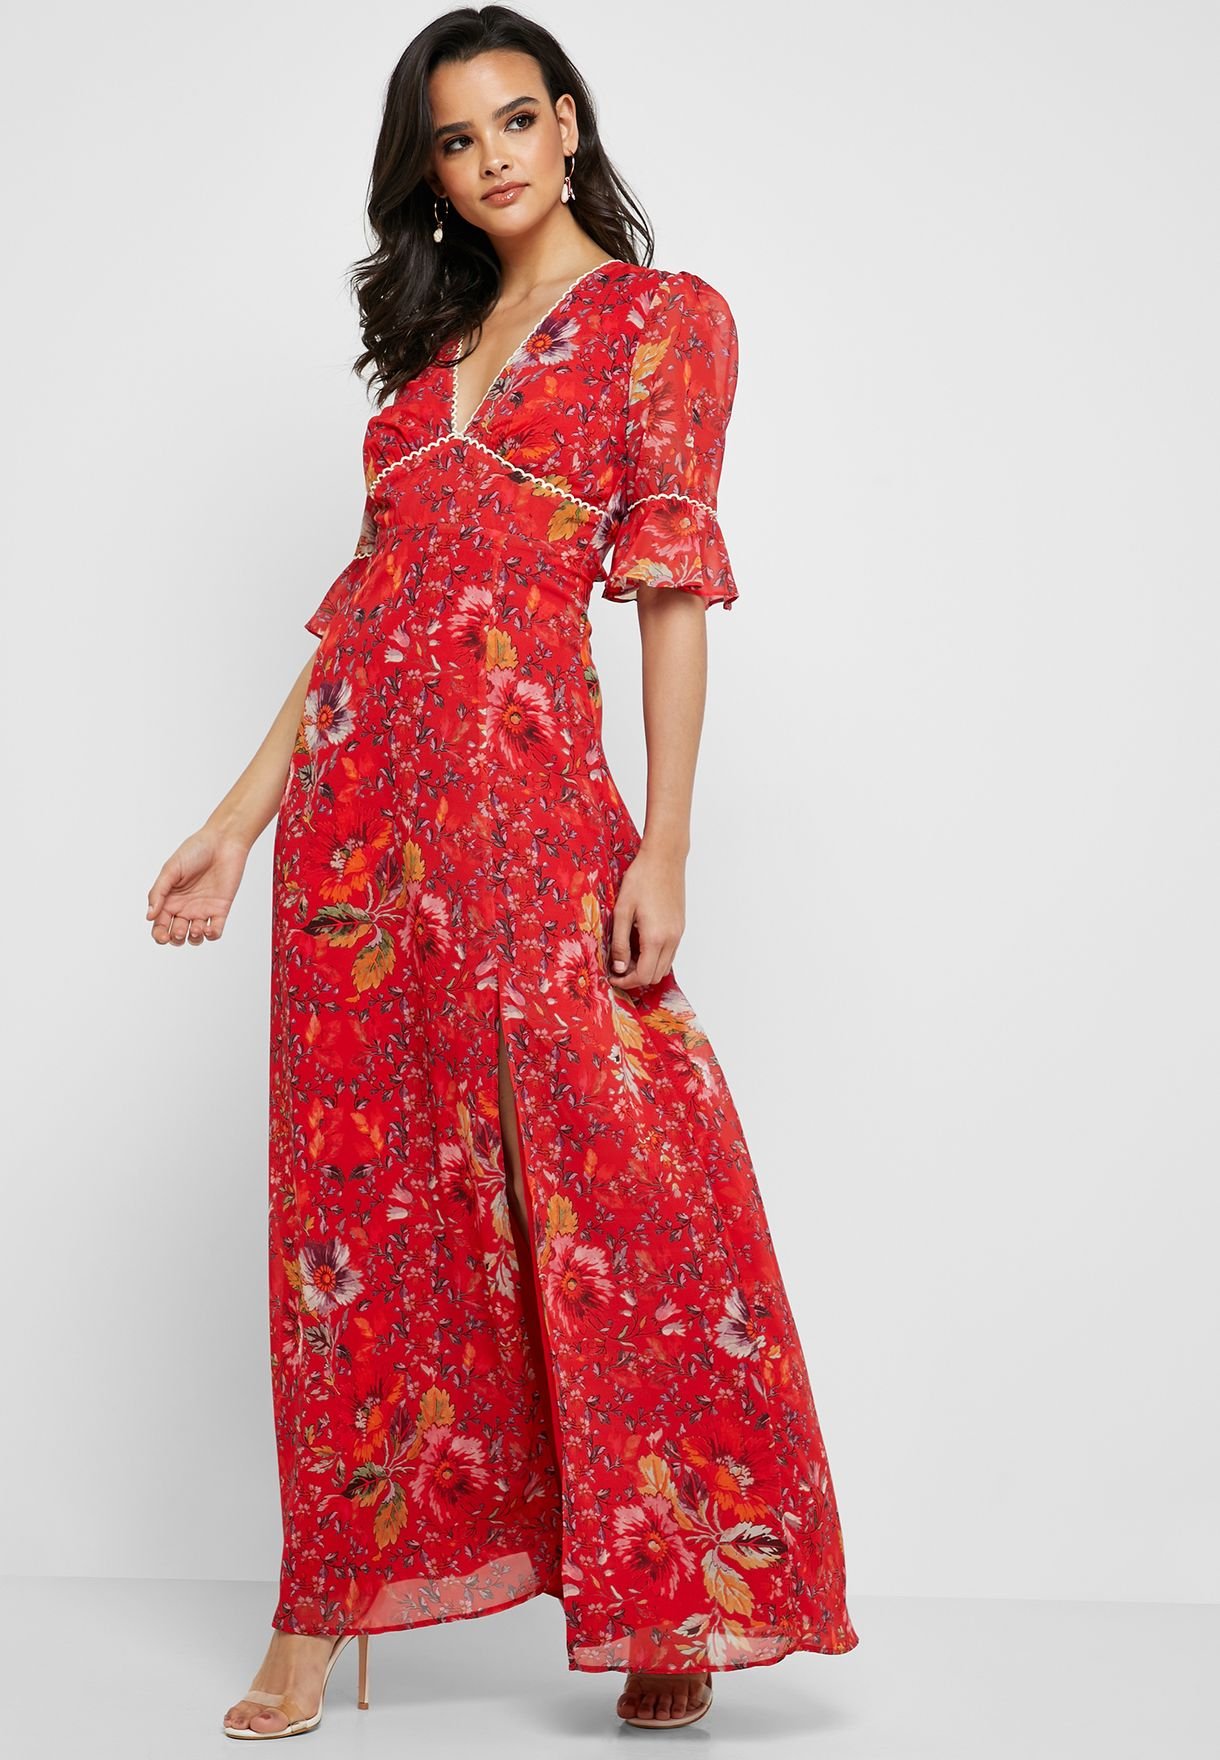 Hope & Ivy Floral Open Back Flute Sleeve Maxi Dress in Red.jpg